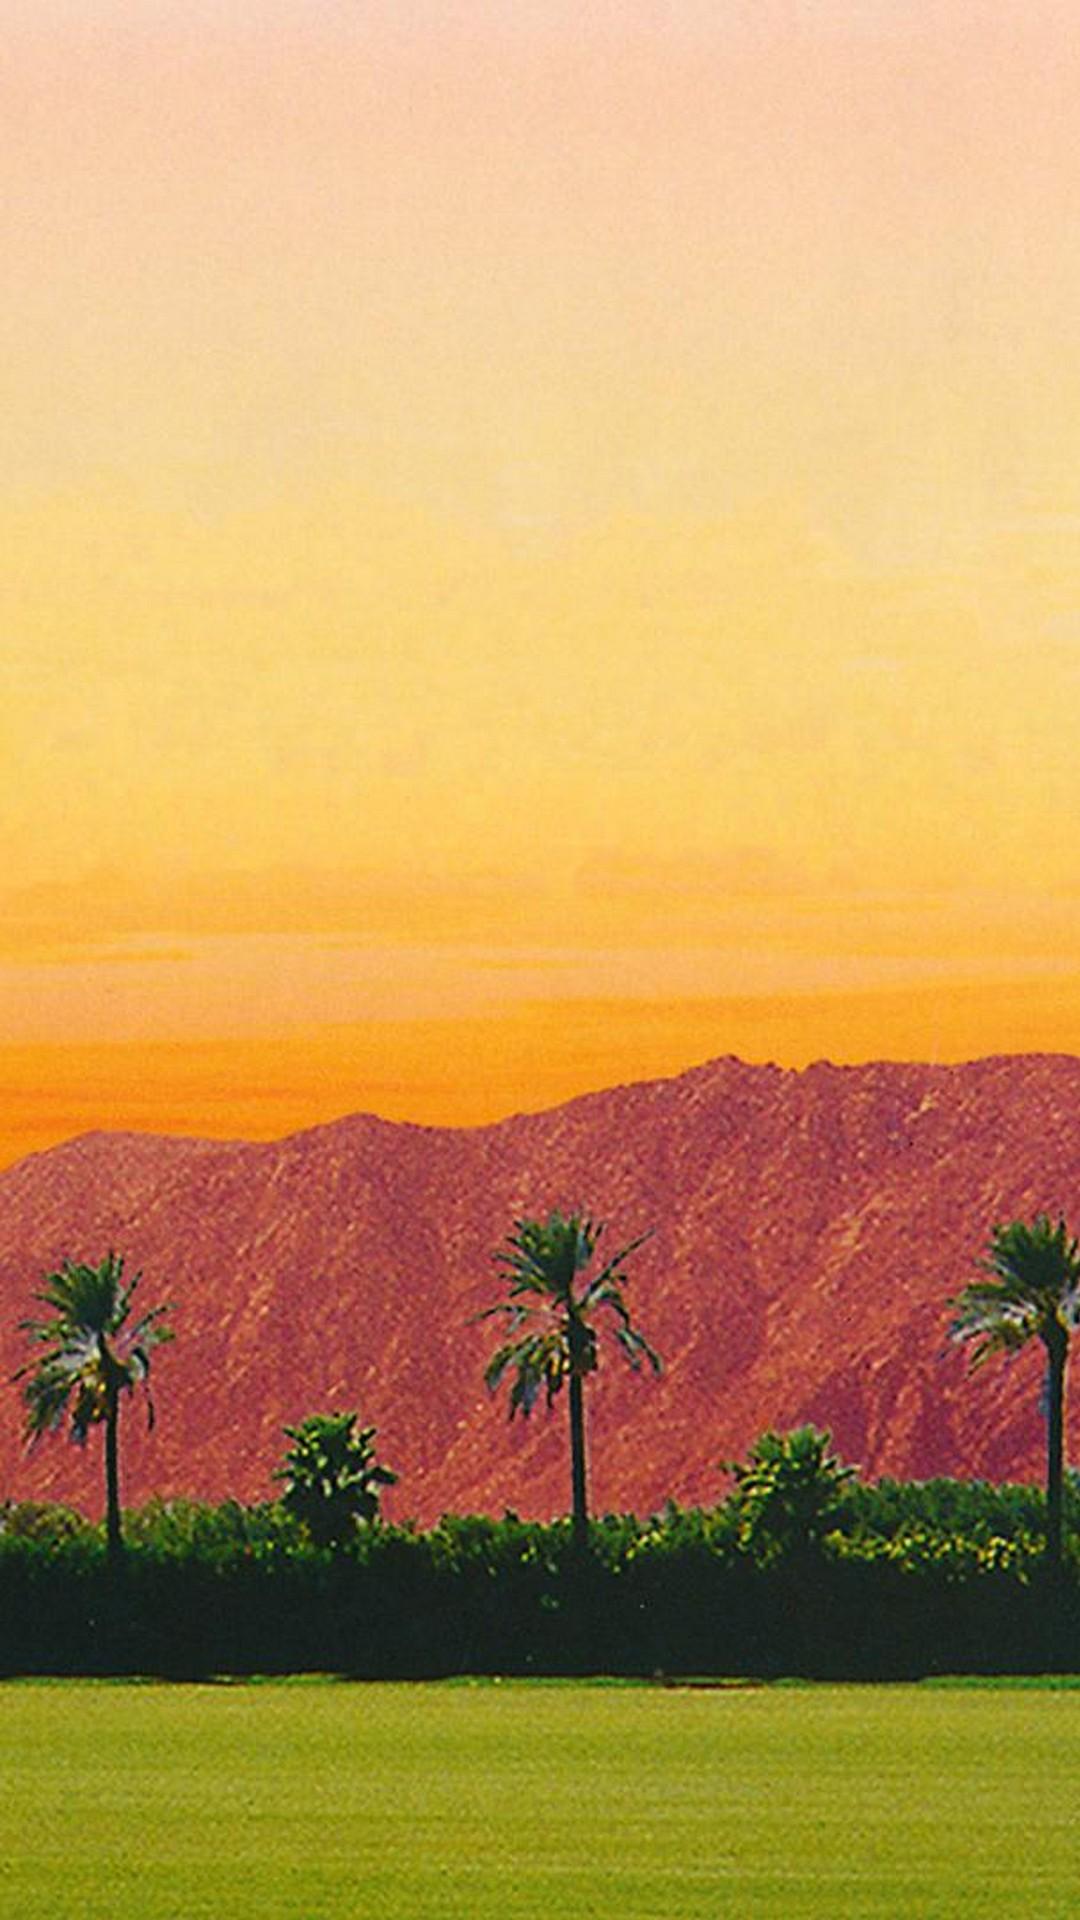 Coachella 2019 Wallpaper For Android Android Wallpaper